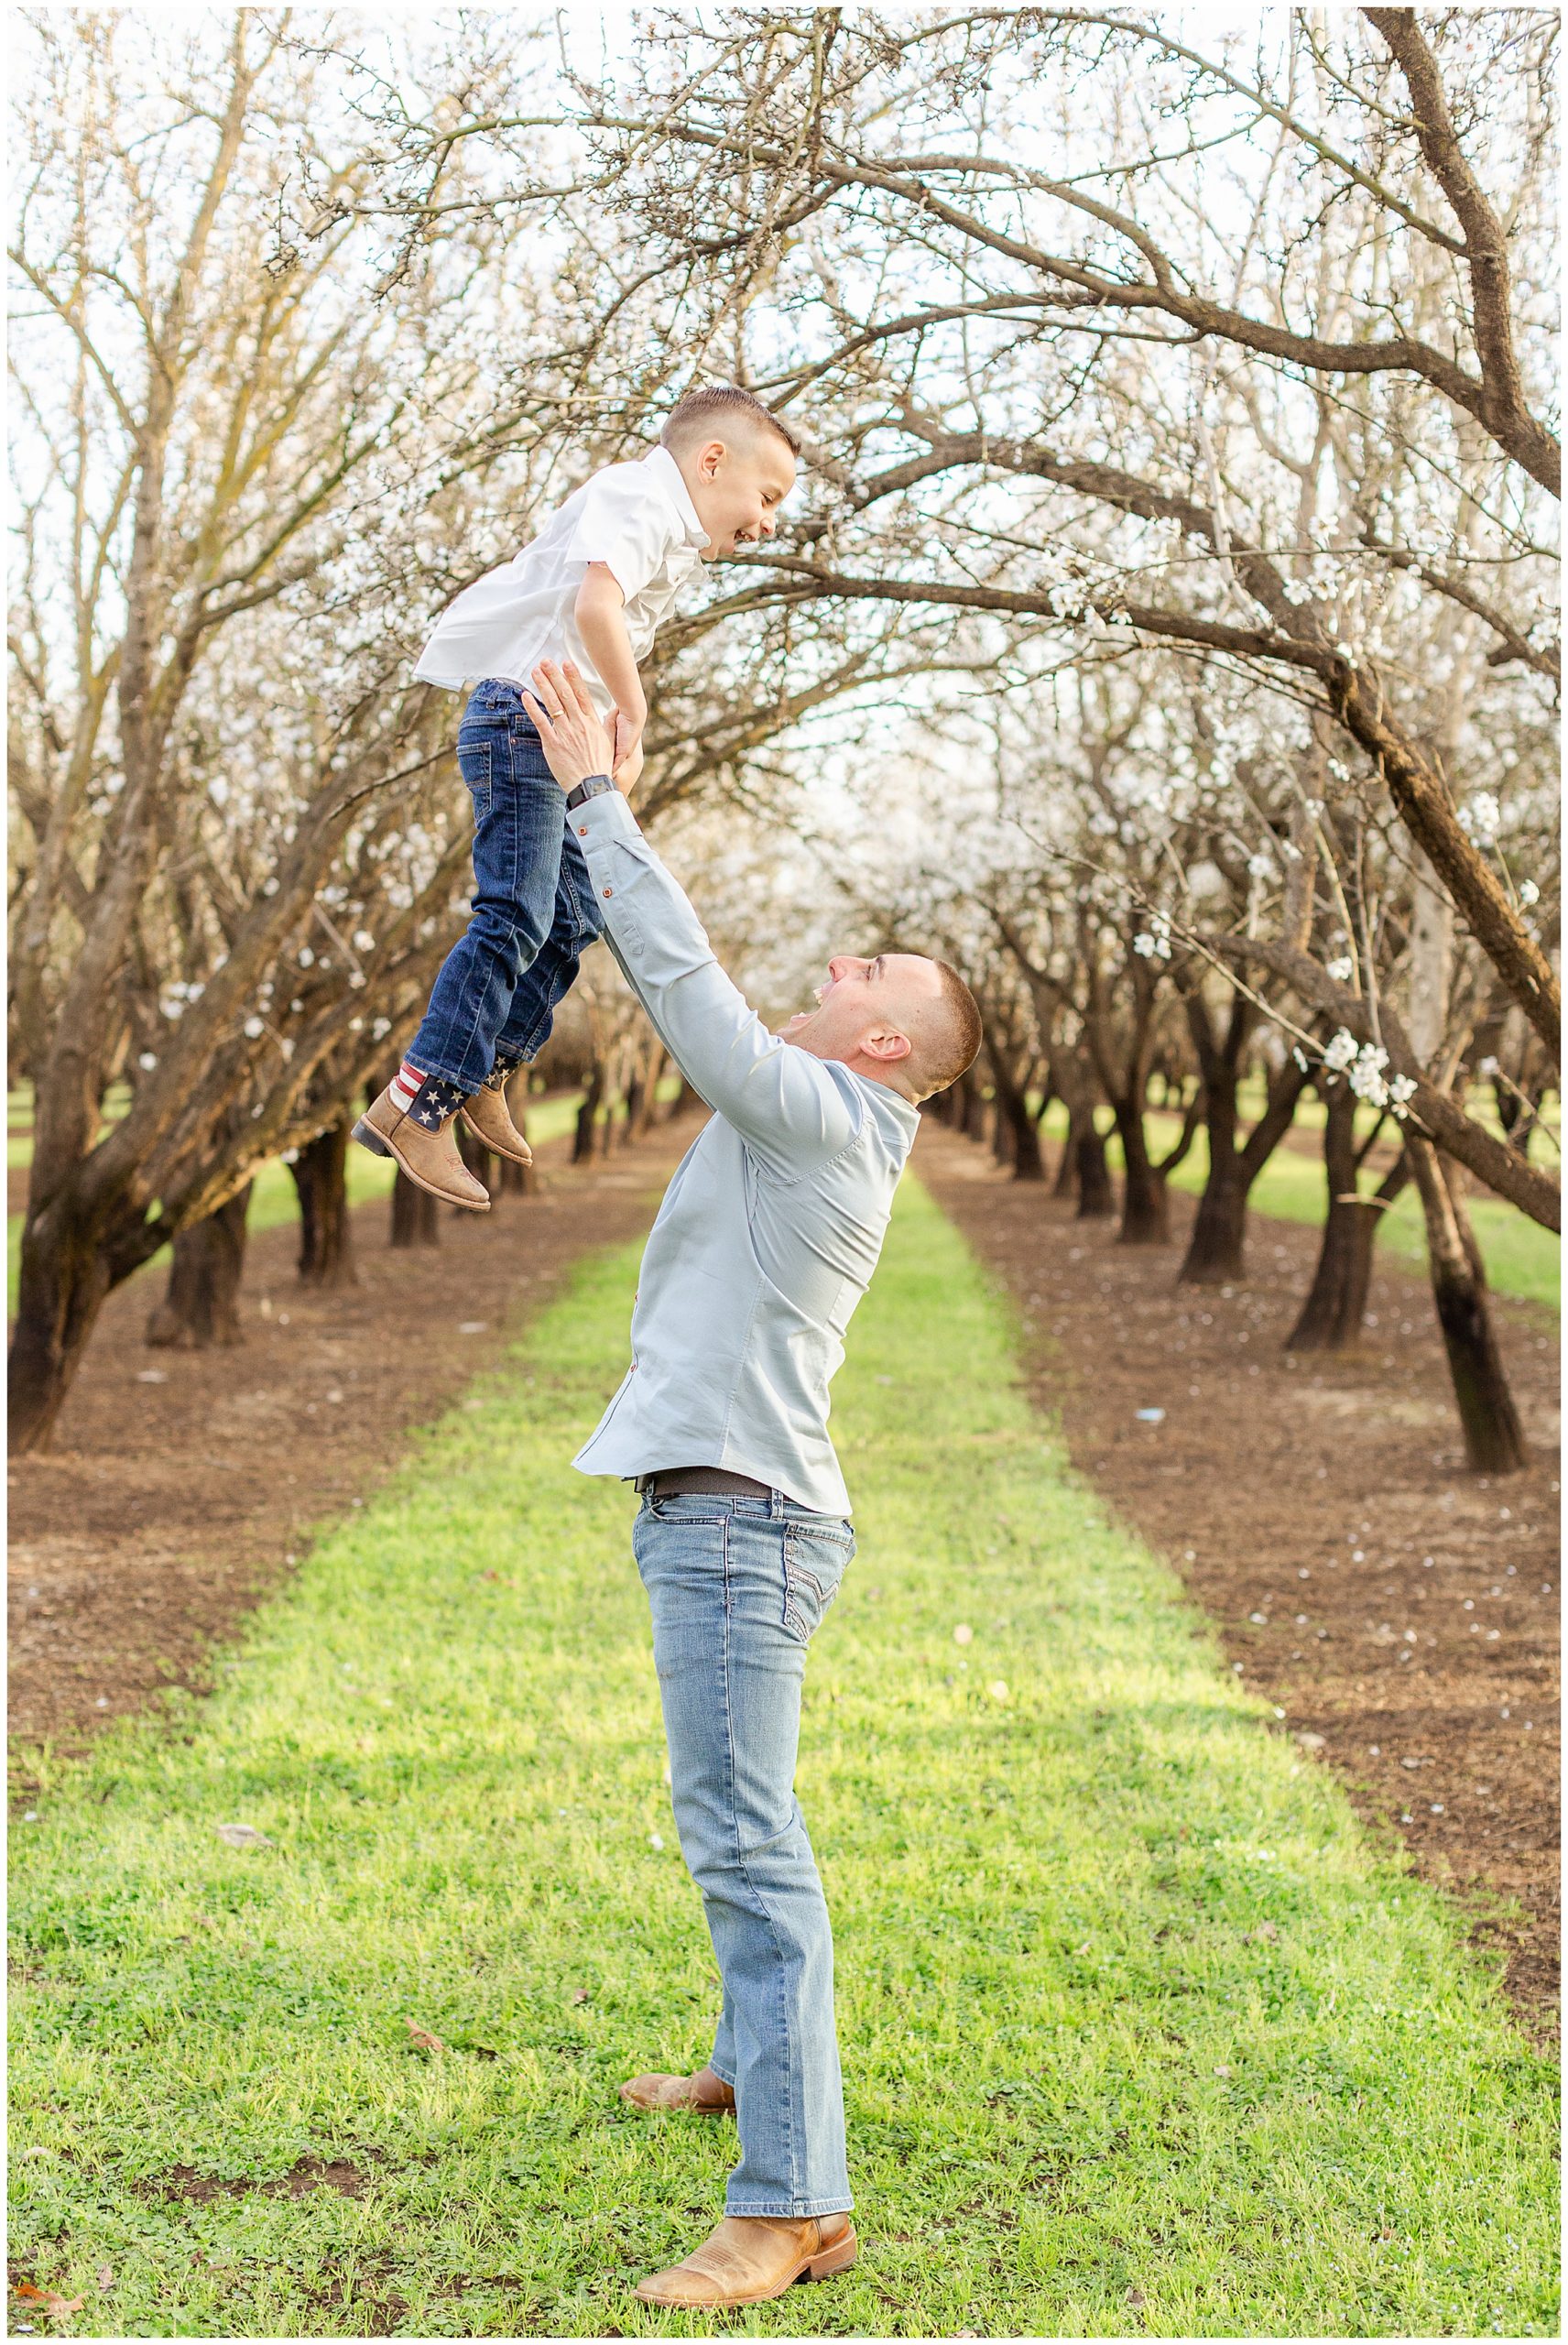 Spring Almond Blossoms Family Session February,